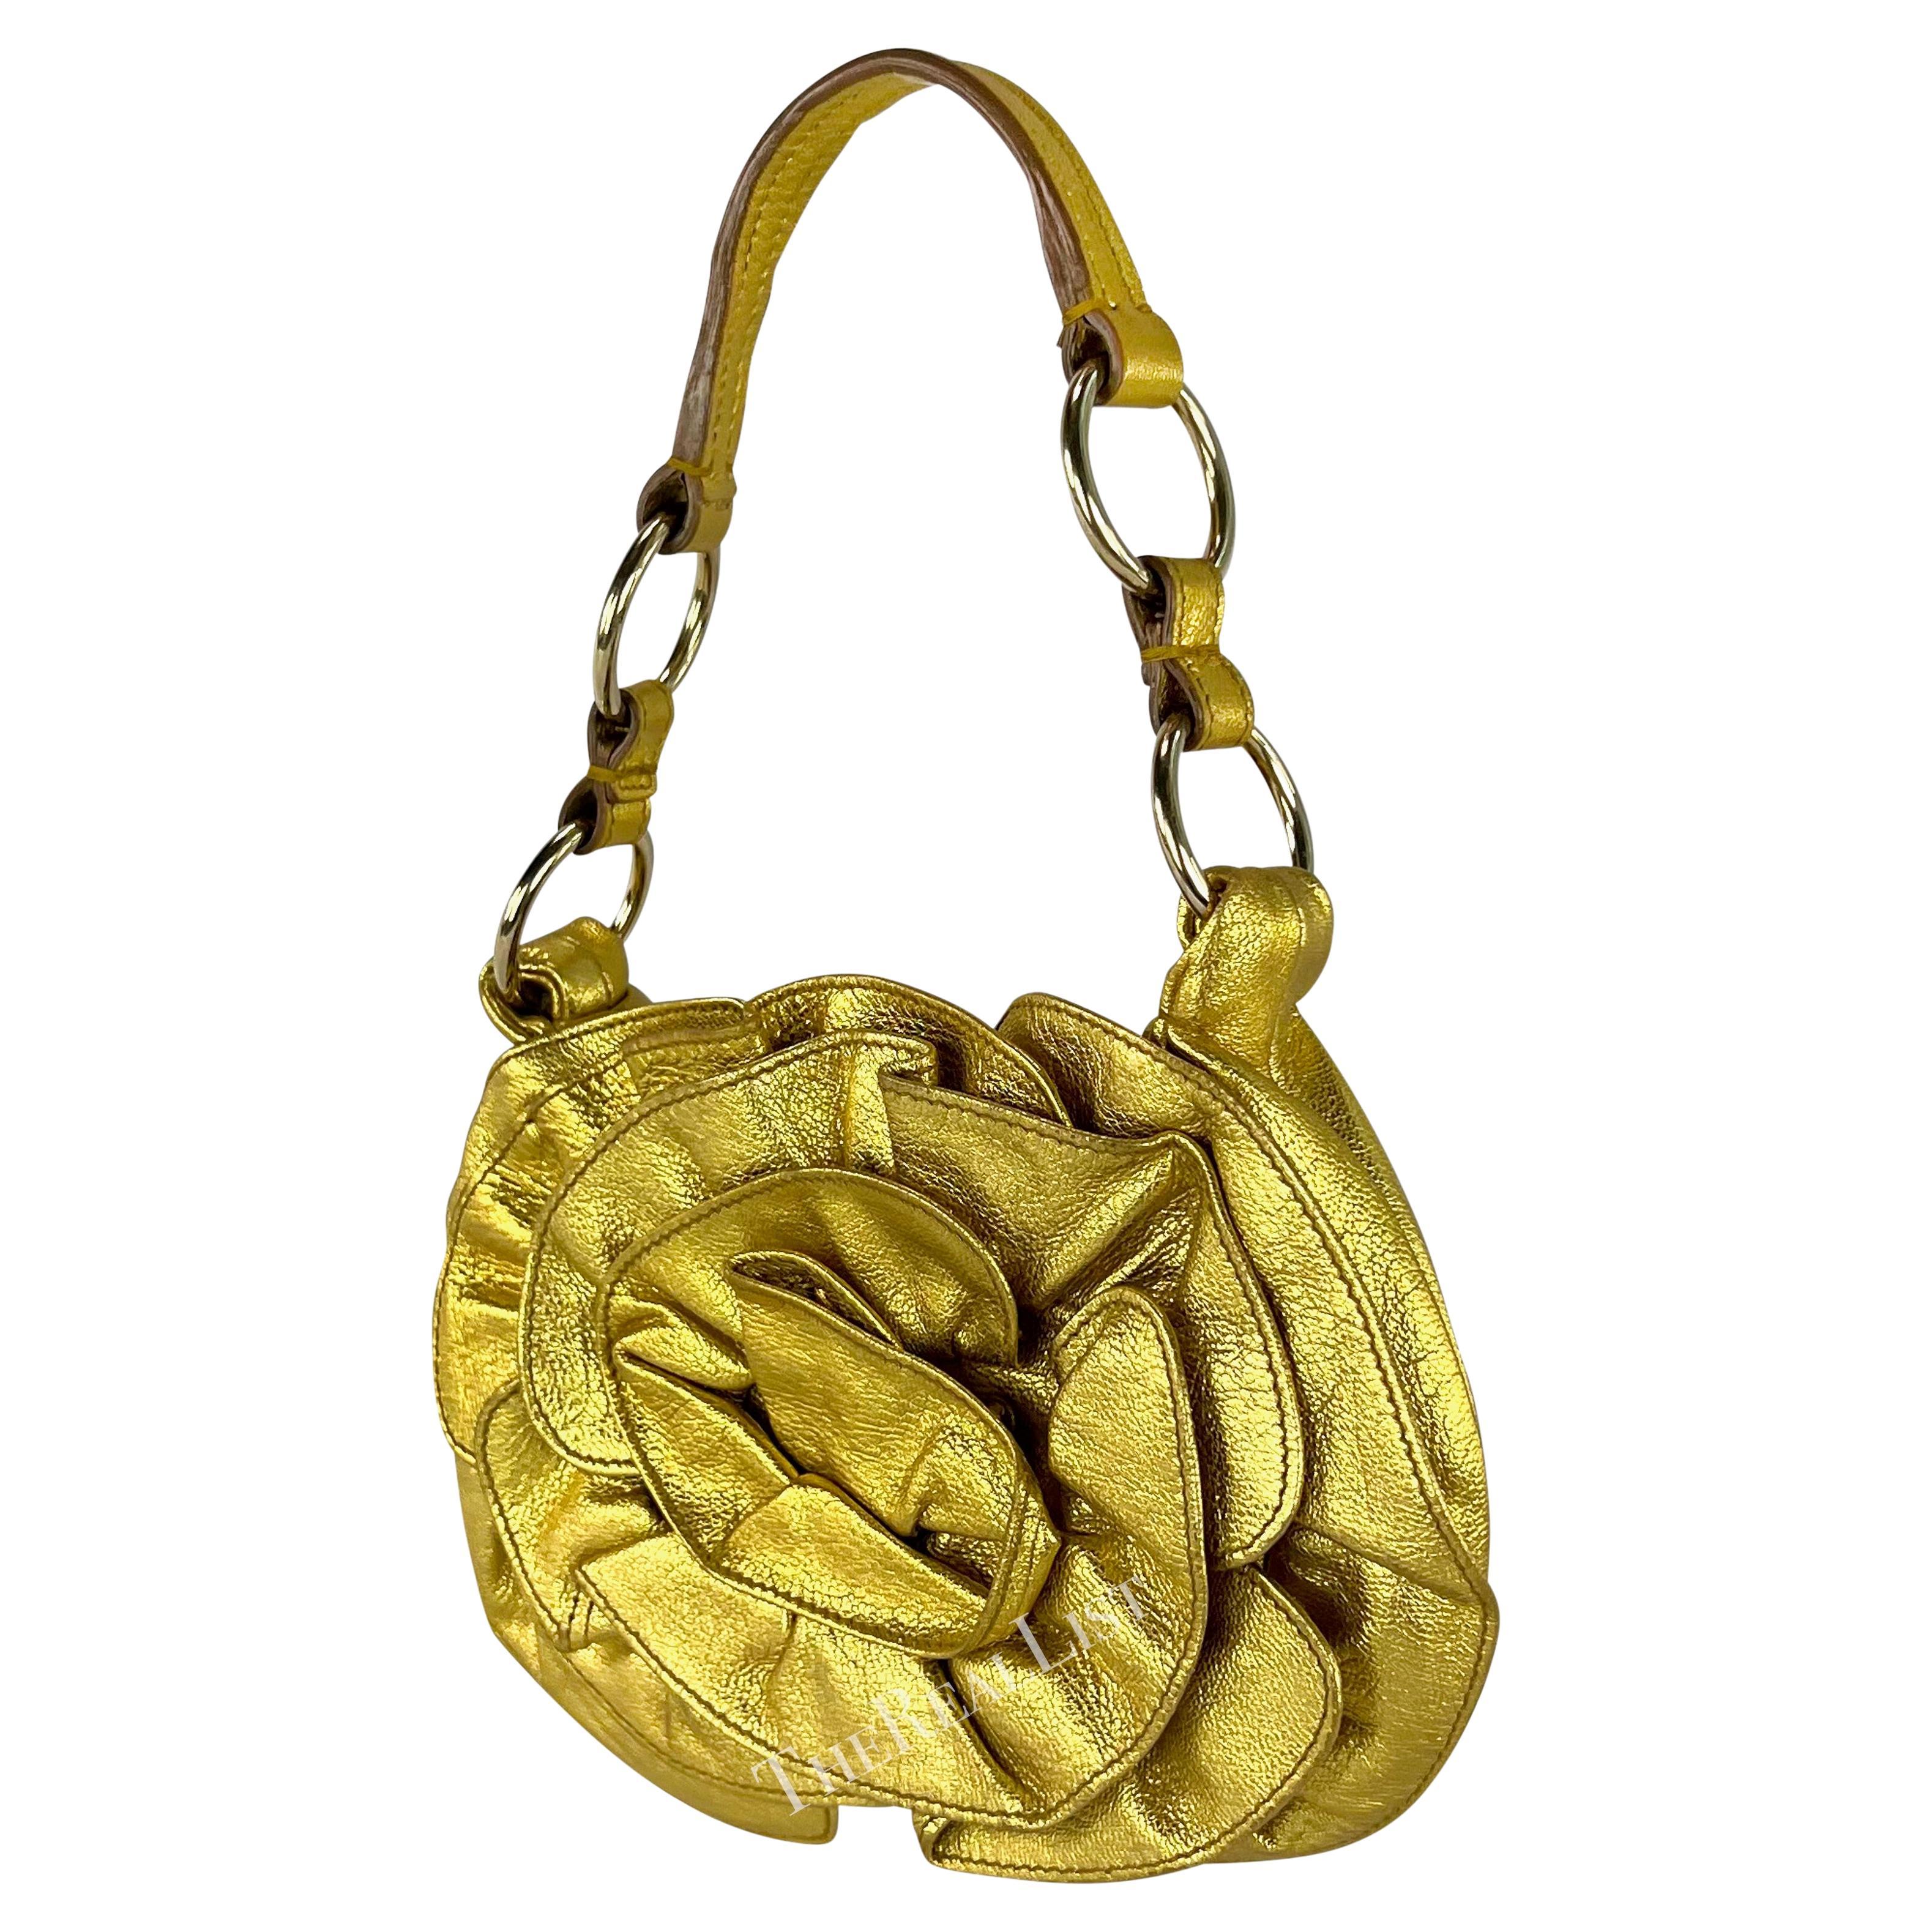 Introducing a stunning gold-tone leather Yves Saint Laurent Rive Gauche mini bag designed by Tom Ford from the early 2000s. Crafted entirely from metallic gold leather, this mini bag showcases an exquisite ruffle floral design, adding an elegant